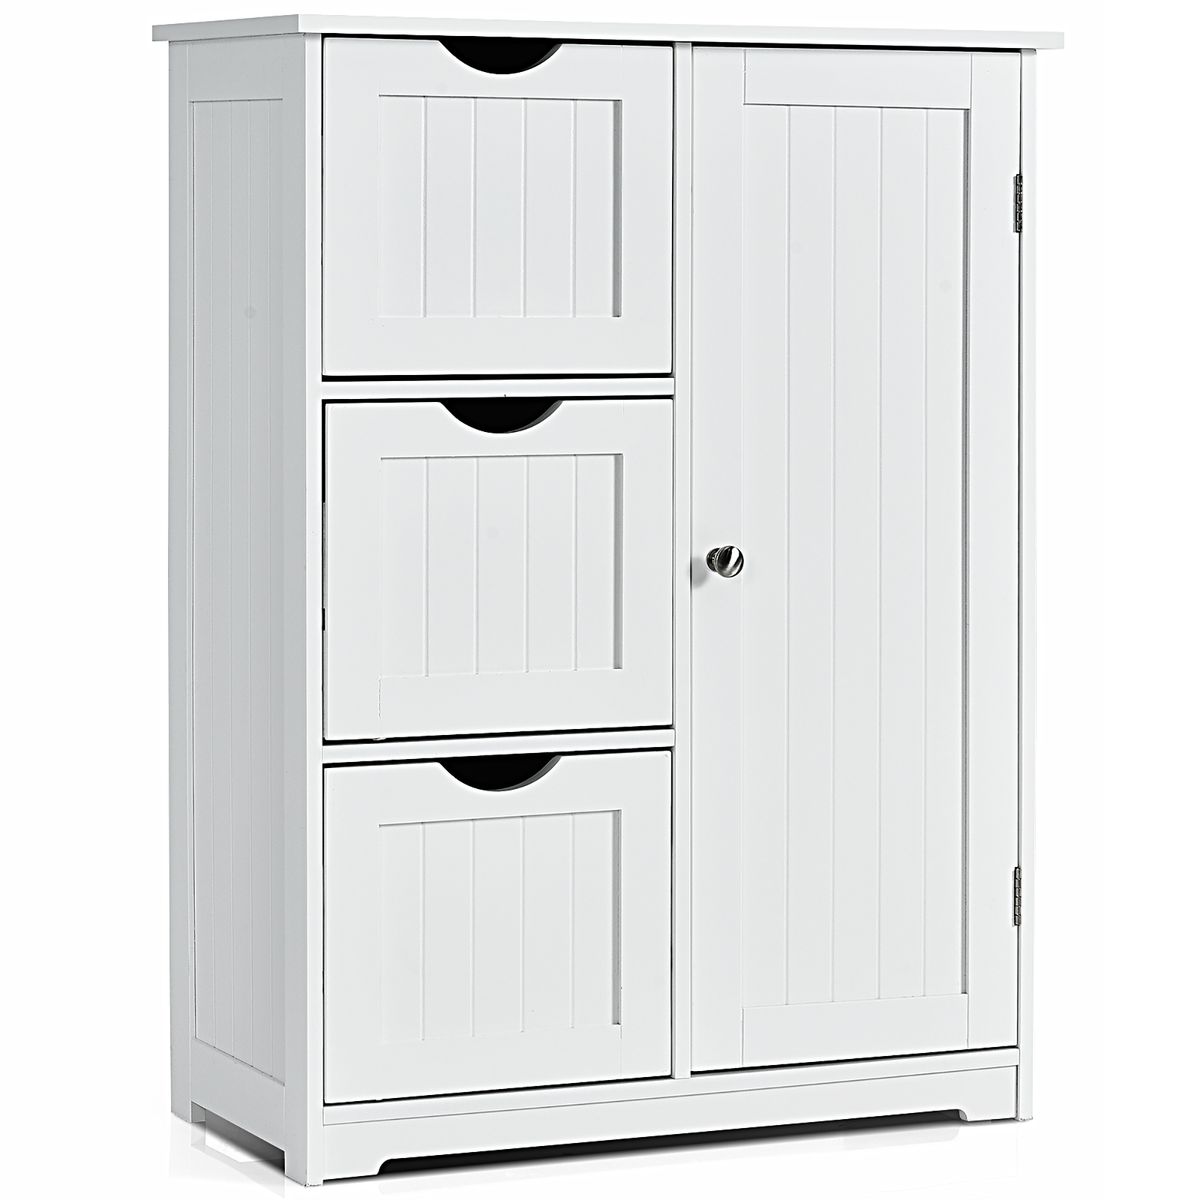 Photos - Wardrobe Costway Bathroom Floor Cabinet with 3 Drawers and 1 Cupboard - White HW662 